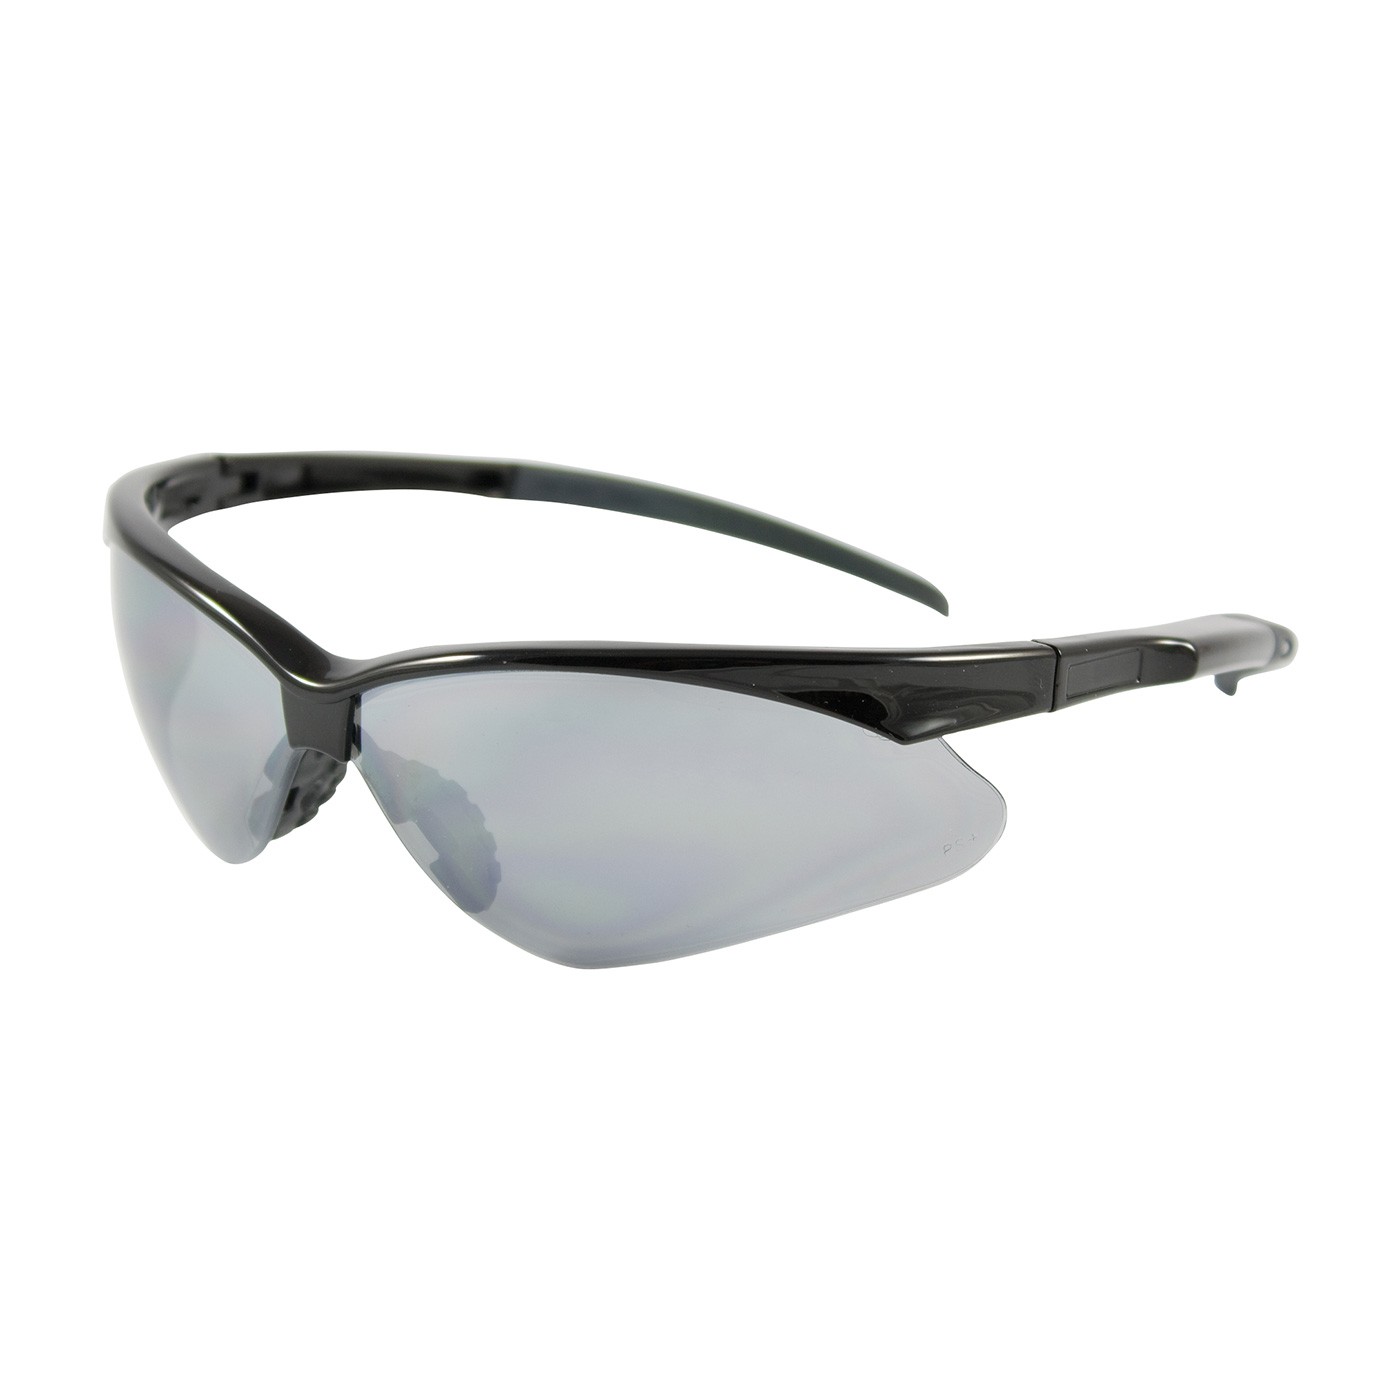 Adversary™ Semi-Rimless Safety Glasses with Black Frame, Silver Mirror Lens and Anti-Scratch Coating  (#250-28-0006)